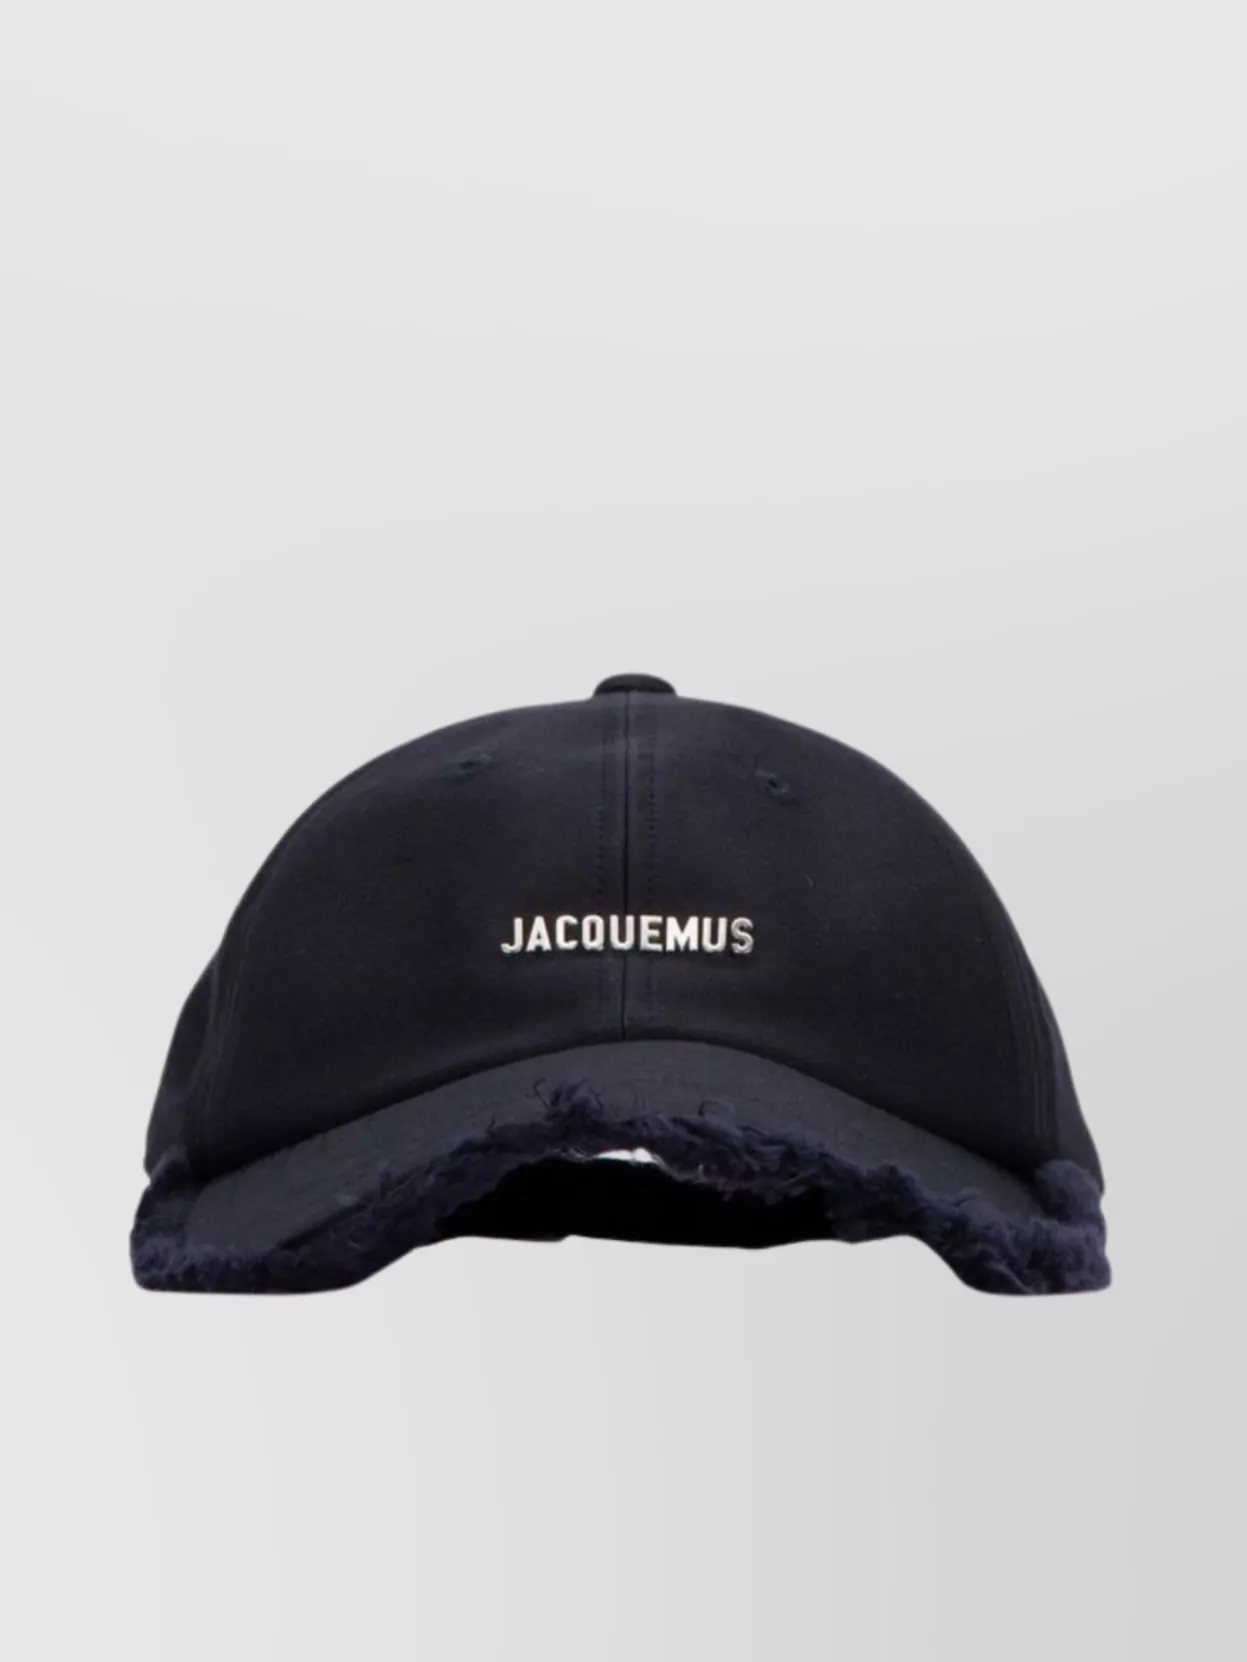 JACQUEMUS DISTRESSED EDGE HAT FOR A STYLISH LOOK